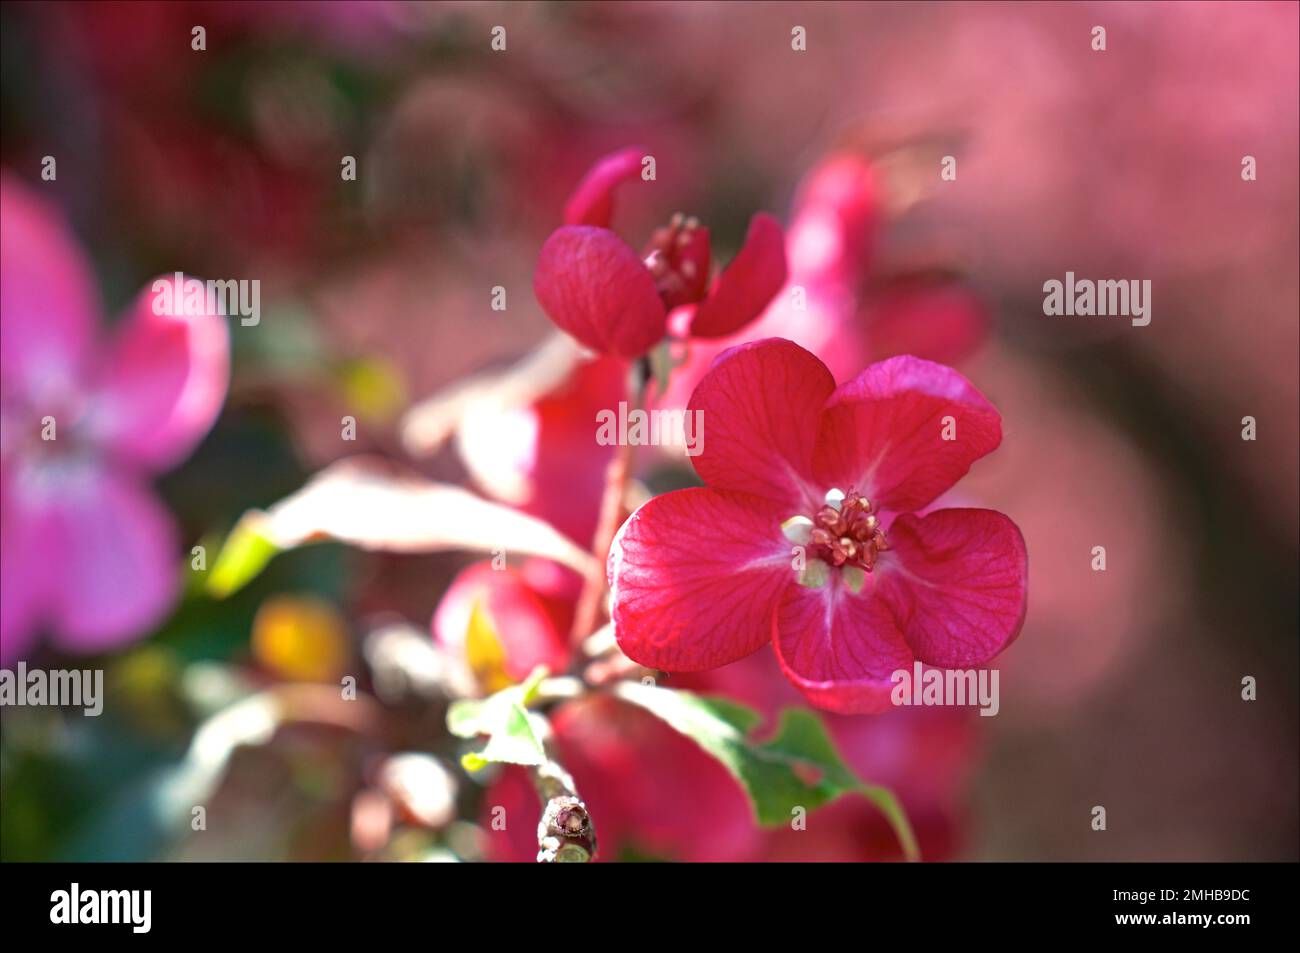 Red cherry flowers with blurred focus background Stock Photo